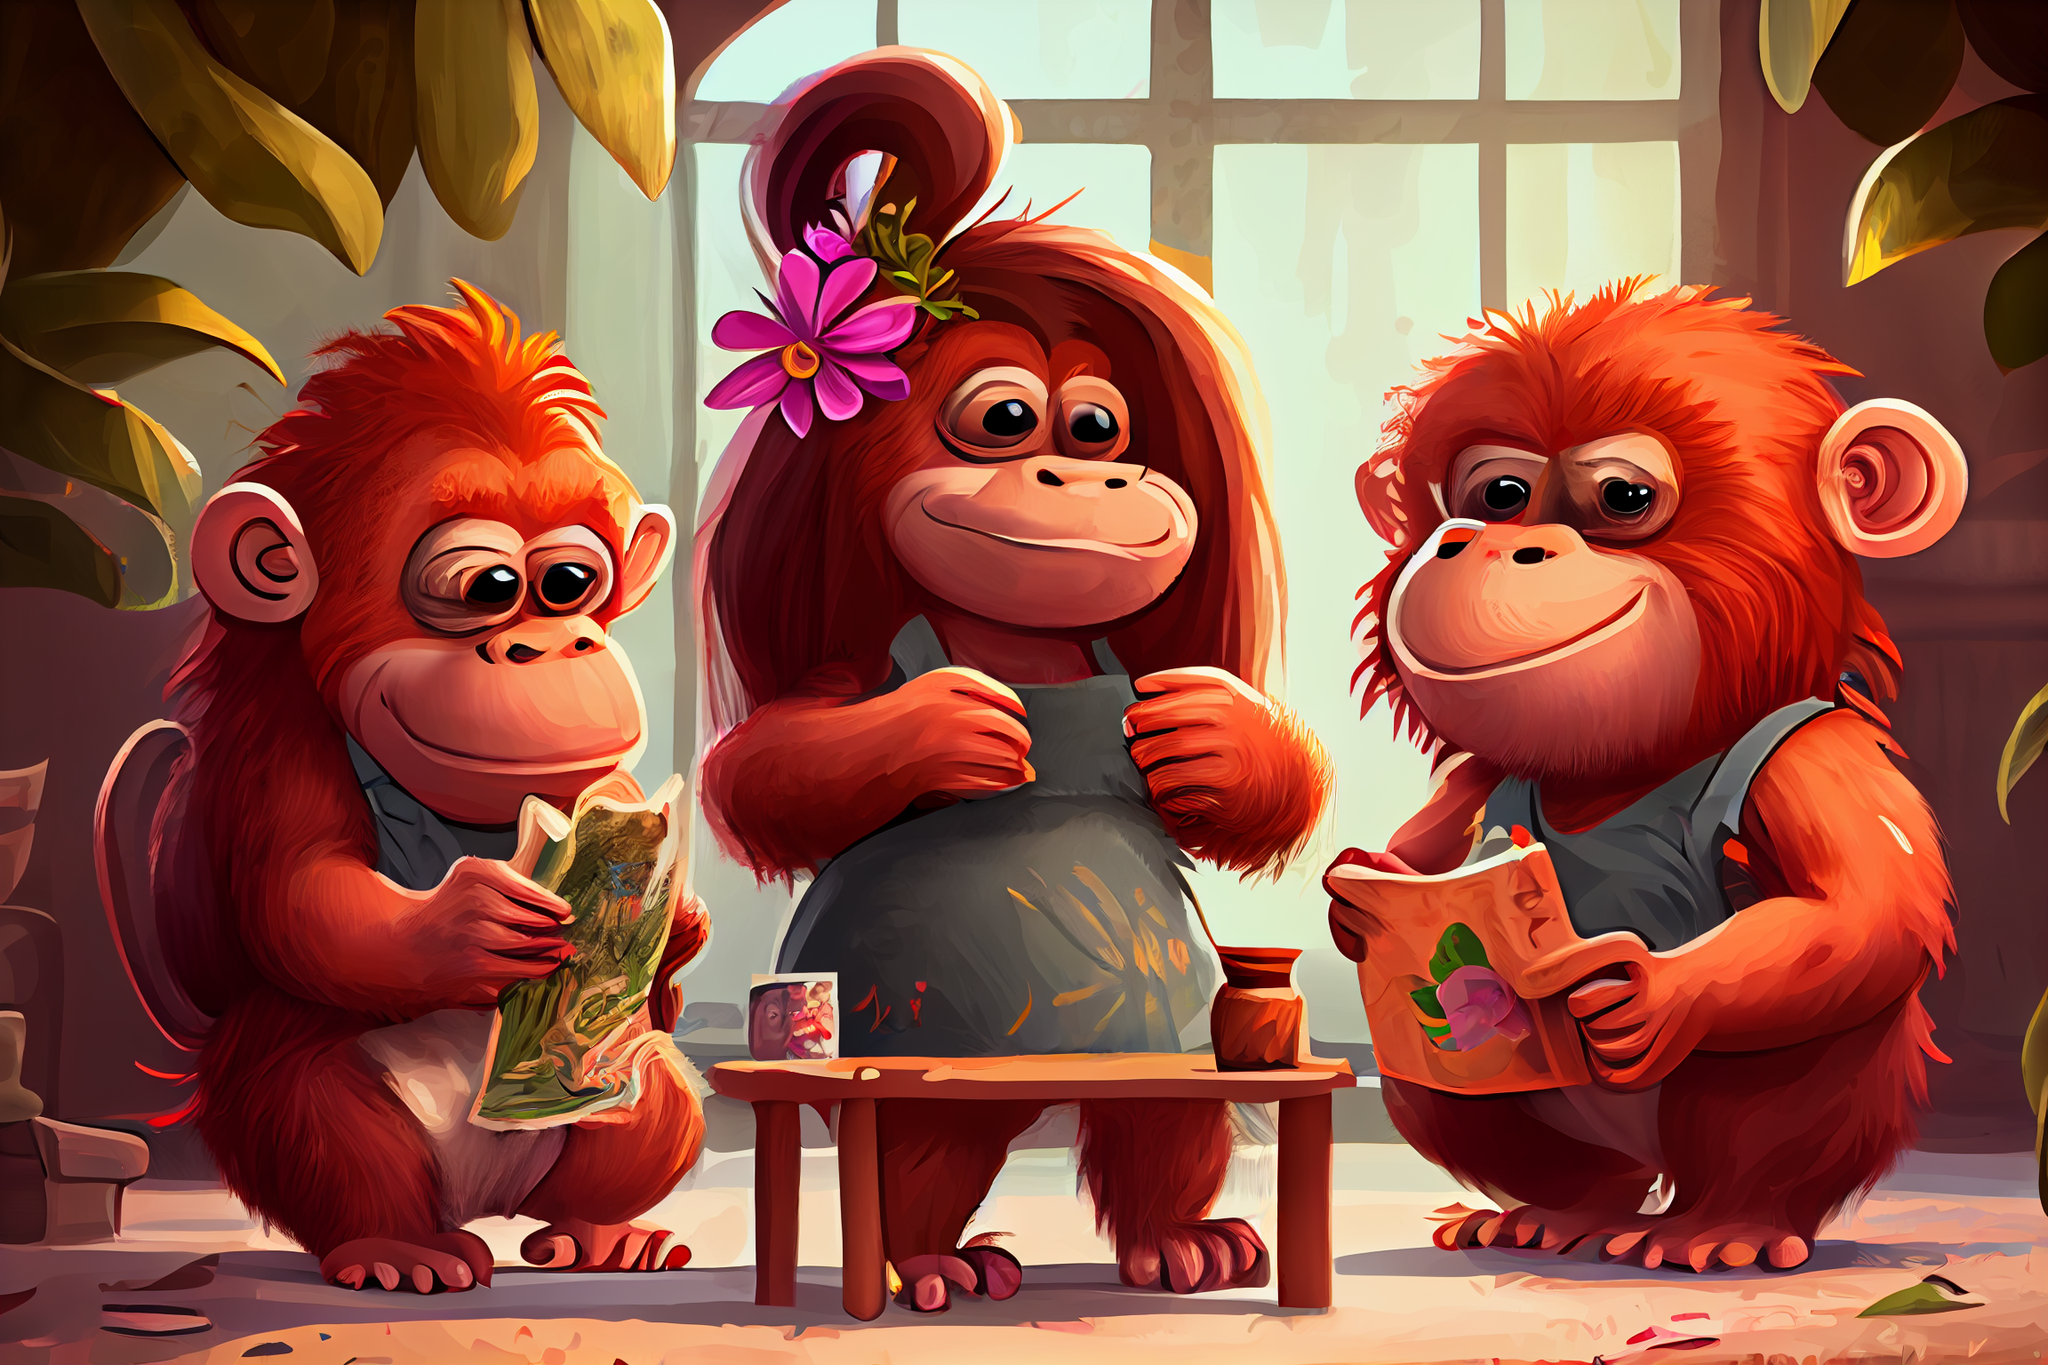 Jungle Trio: A Playful Art Print of Three Orangutans Hanging Out Together